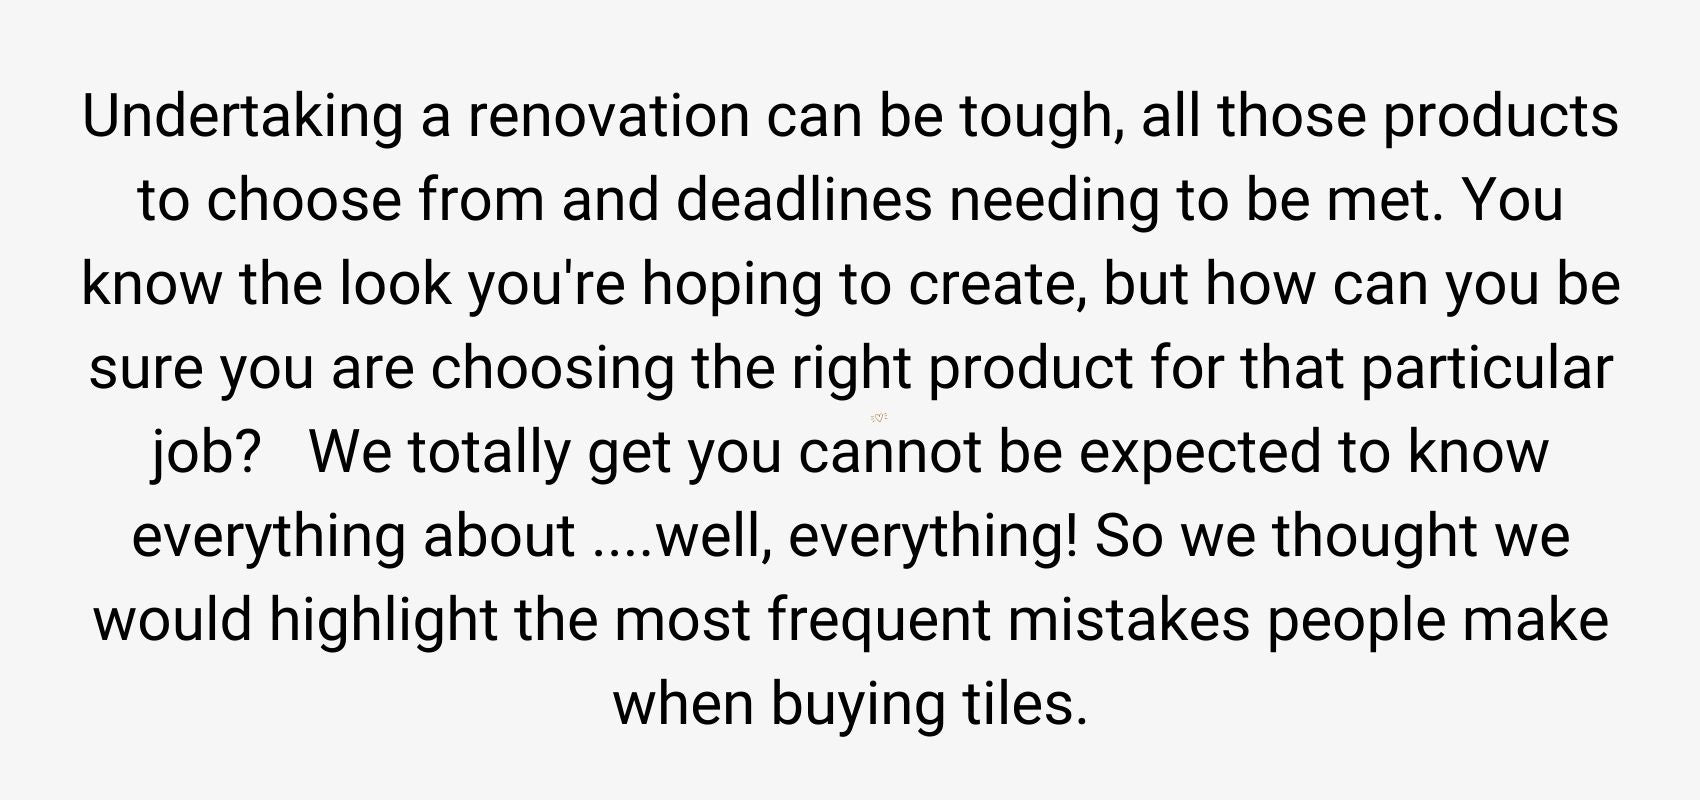 Frequent mistakes when buying tiles 